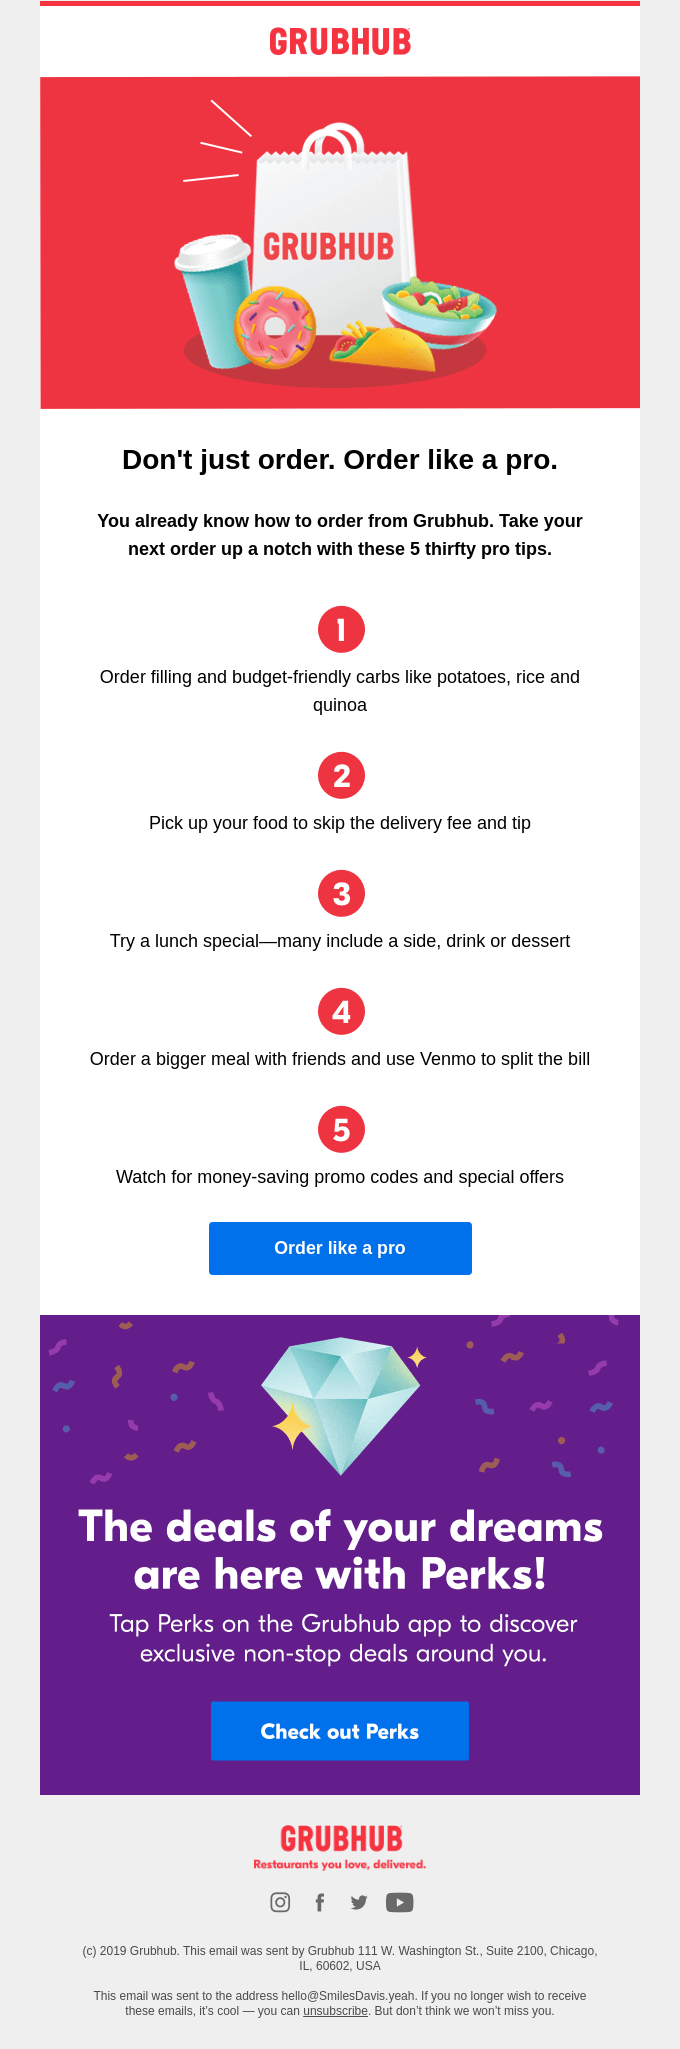 introductory onboarding email by grubhub, screenshot